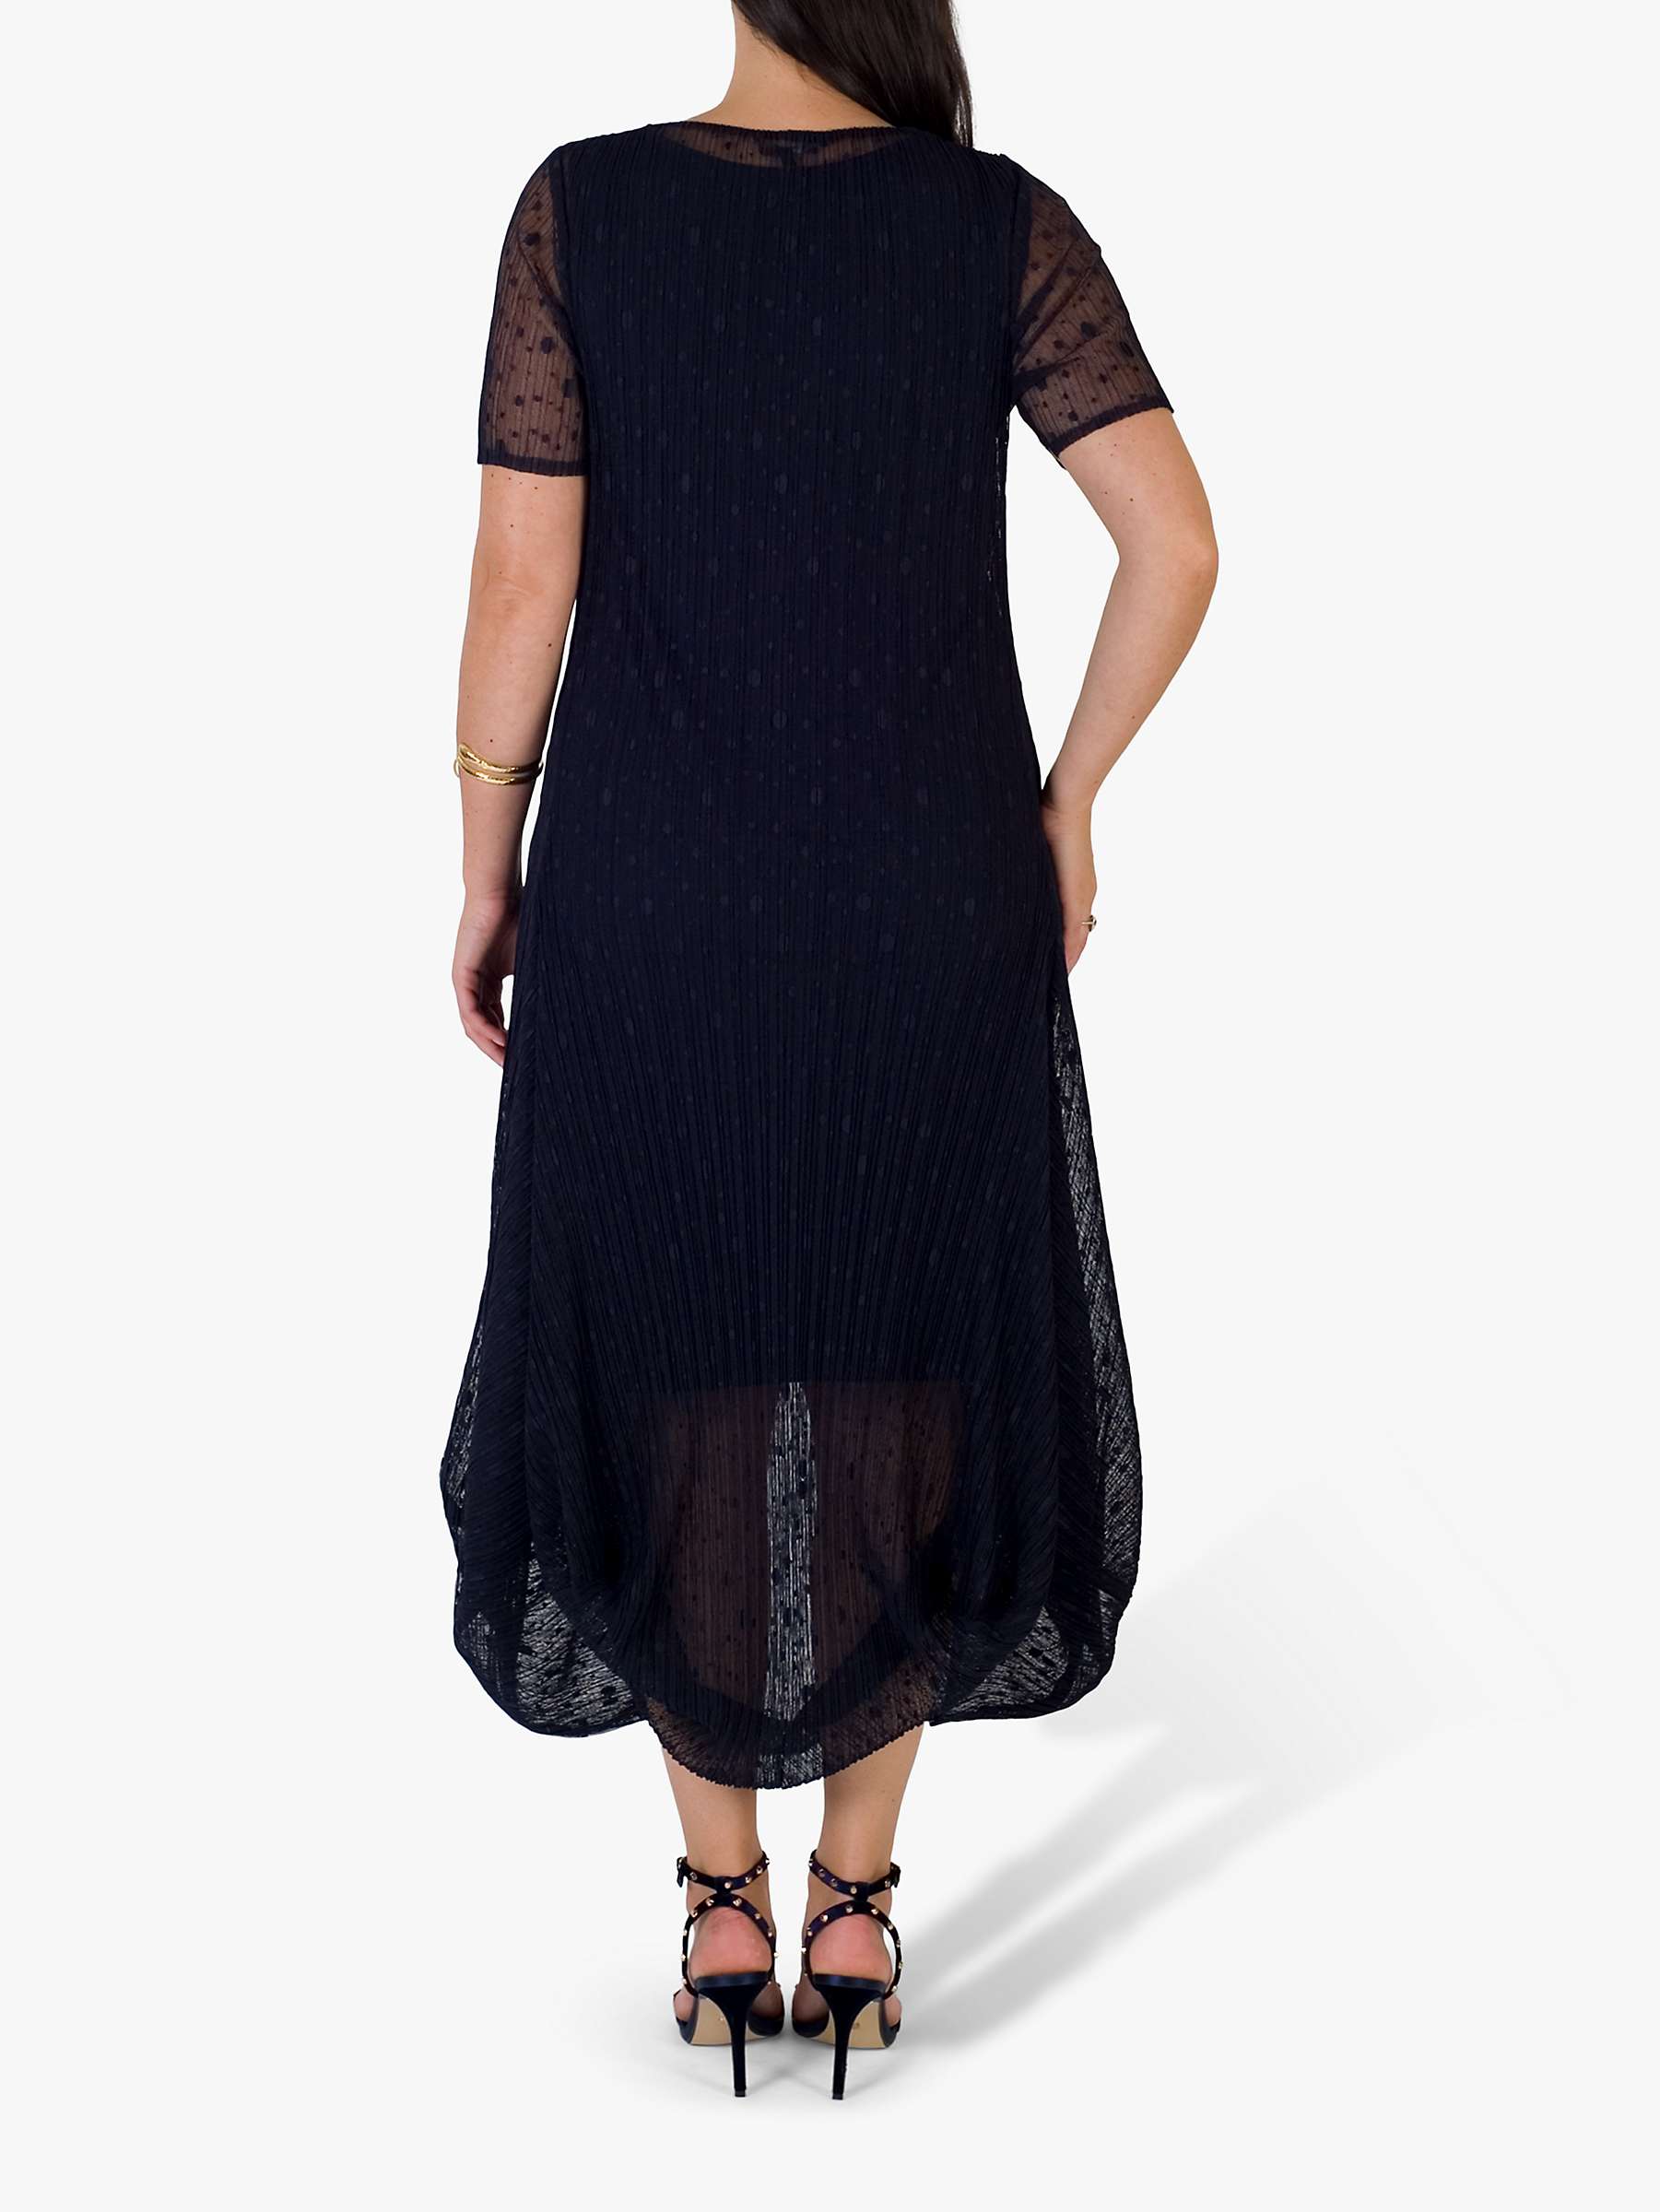 Buy Chesca Crush Pleat Dress, Navy Online at johnlewis.com